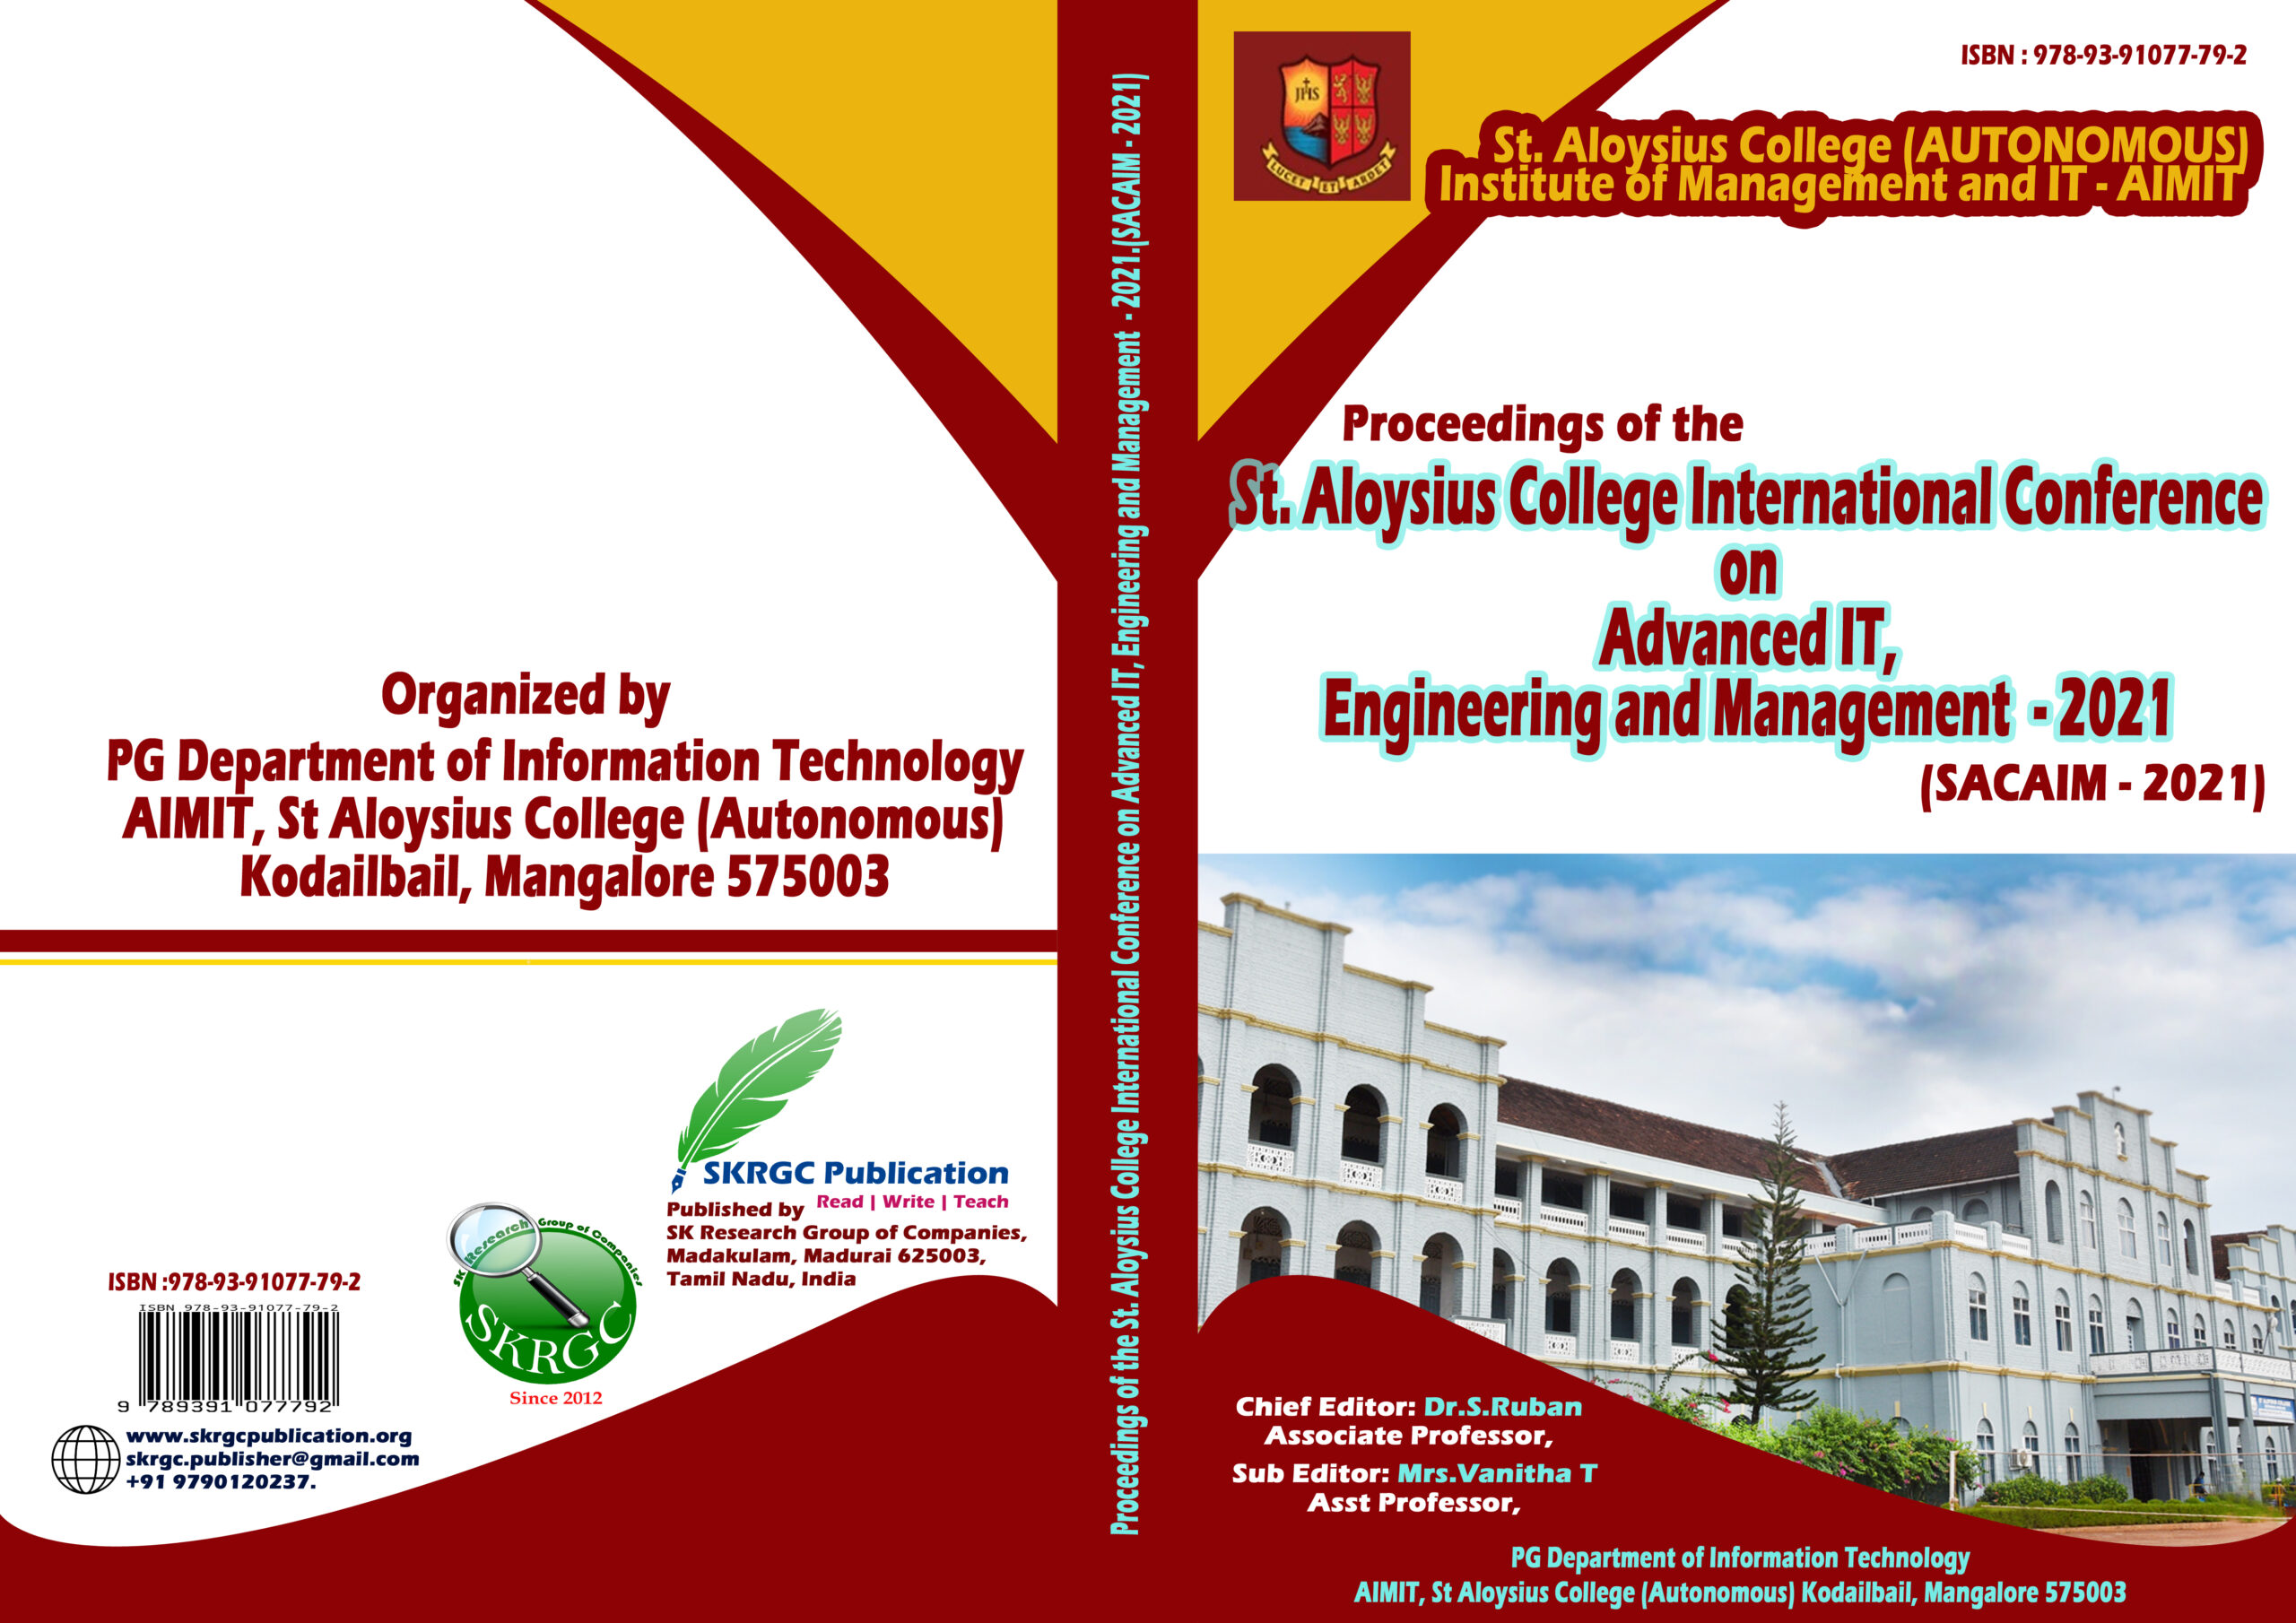 Conference Proceedings of the St. Aloysius College International Conference on Advanced IT,Engineering and Management – 2021.(SACAIM – 2021)